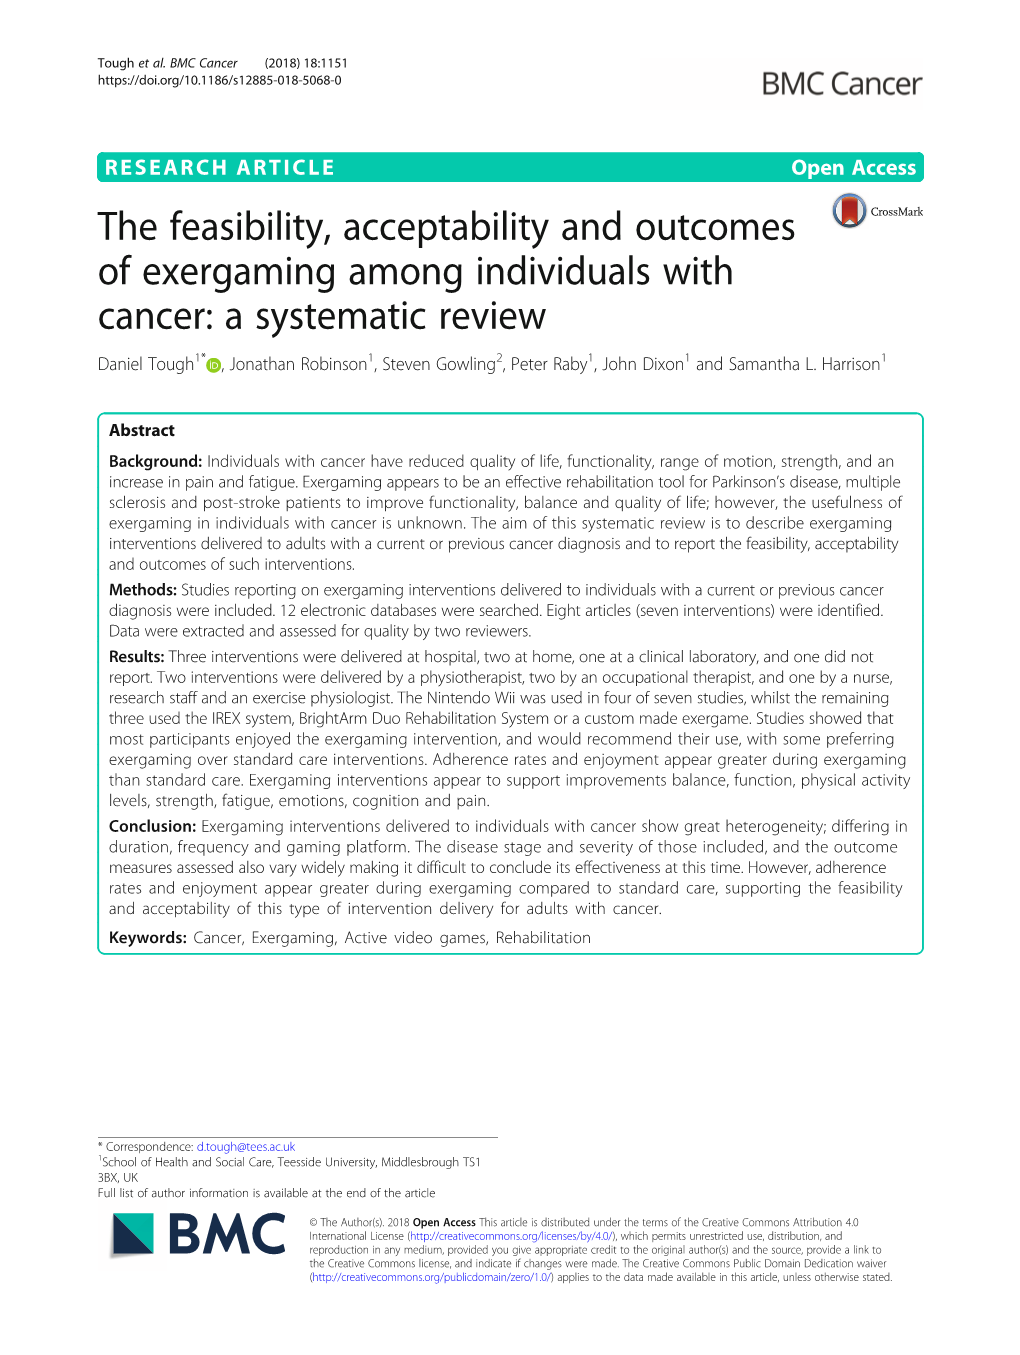 The Feasibility, Acceptability and Outcomes of Exergaming Among Individuals with Cancer: a Systematic Review